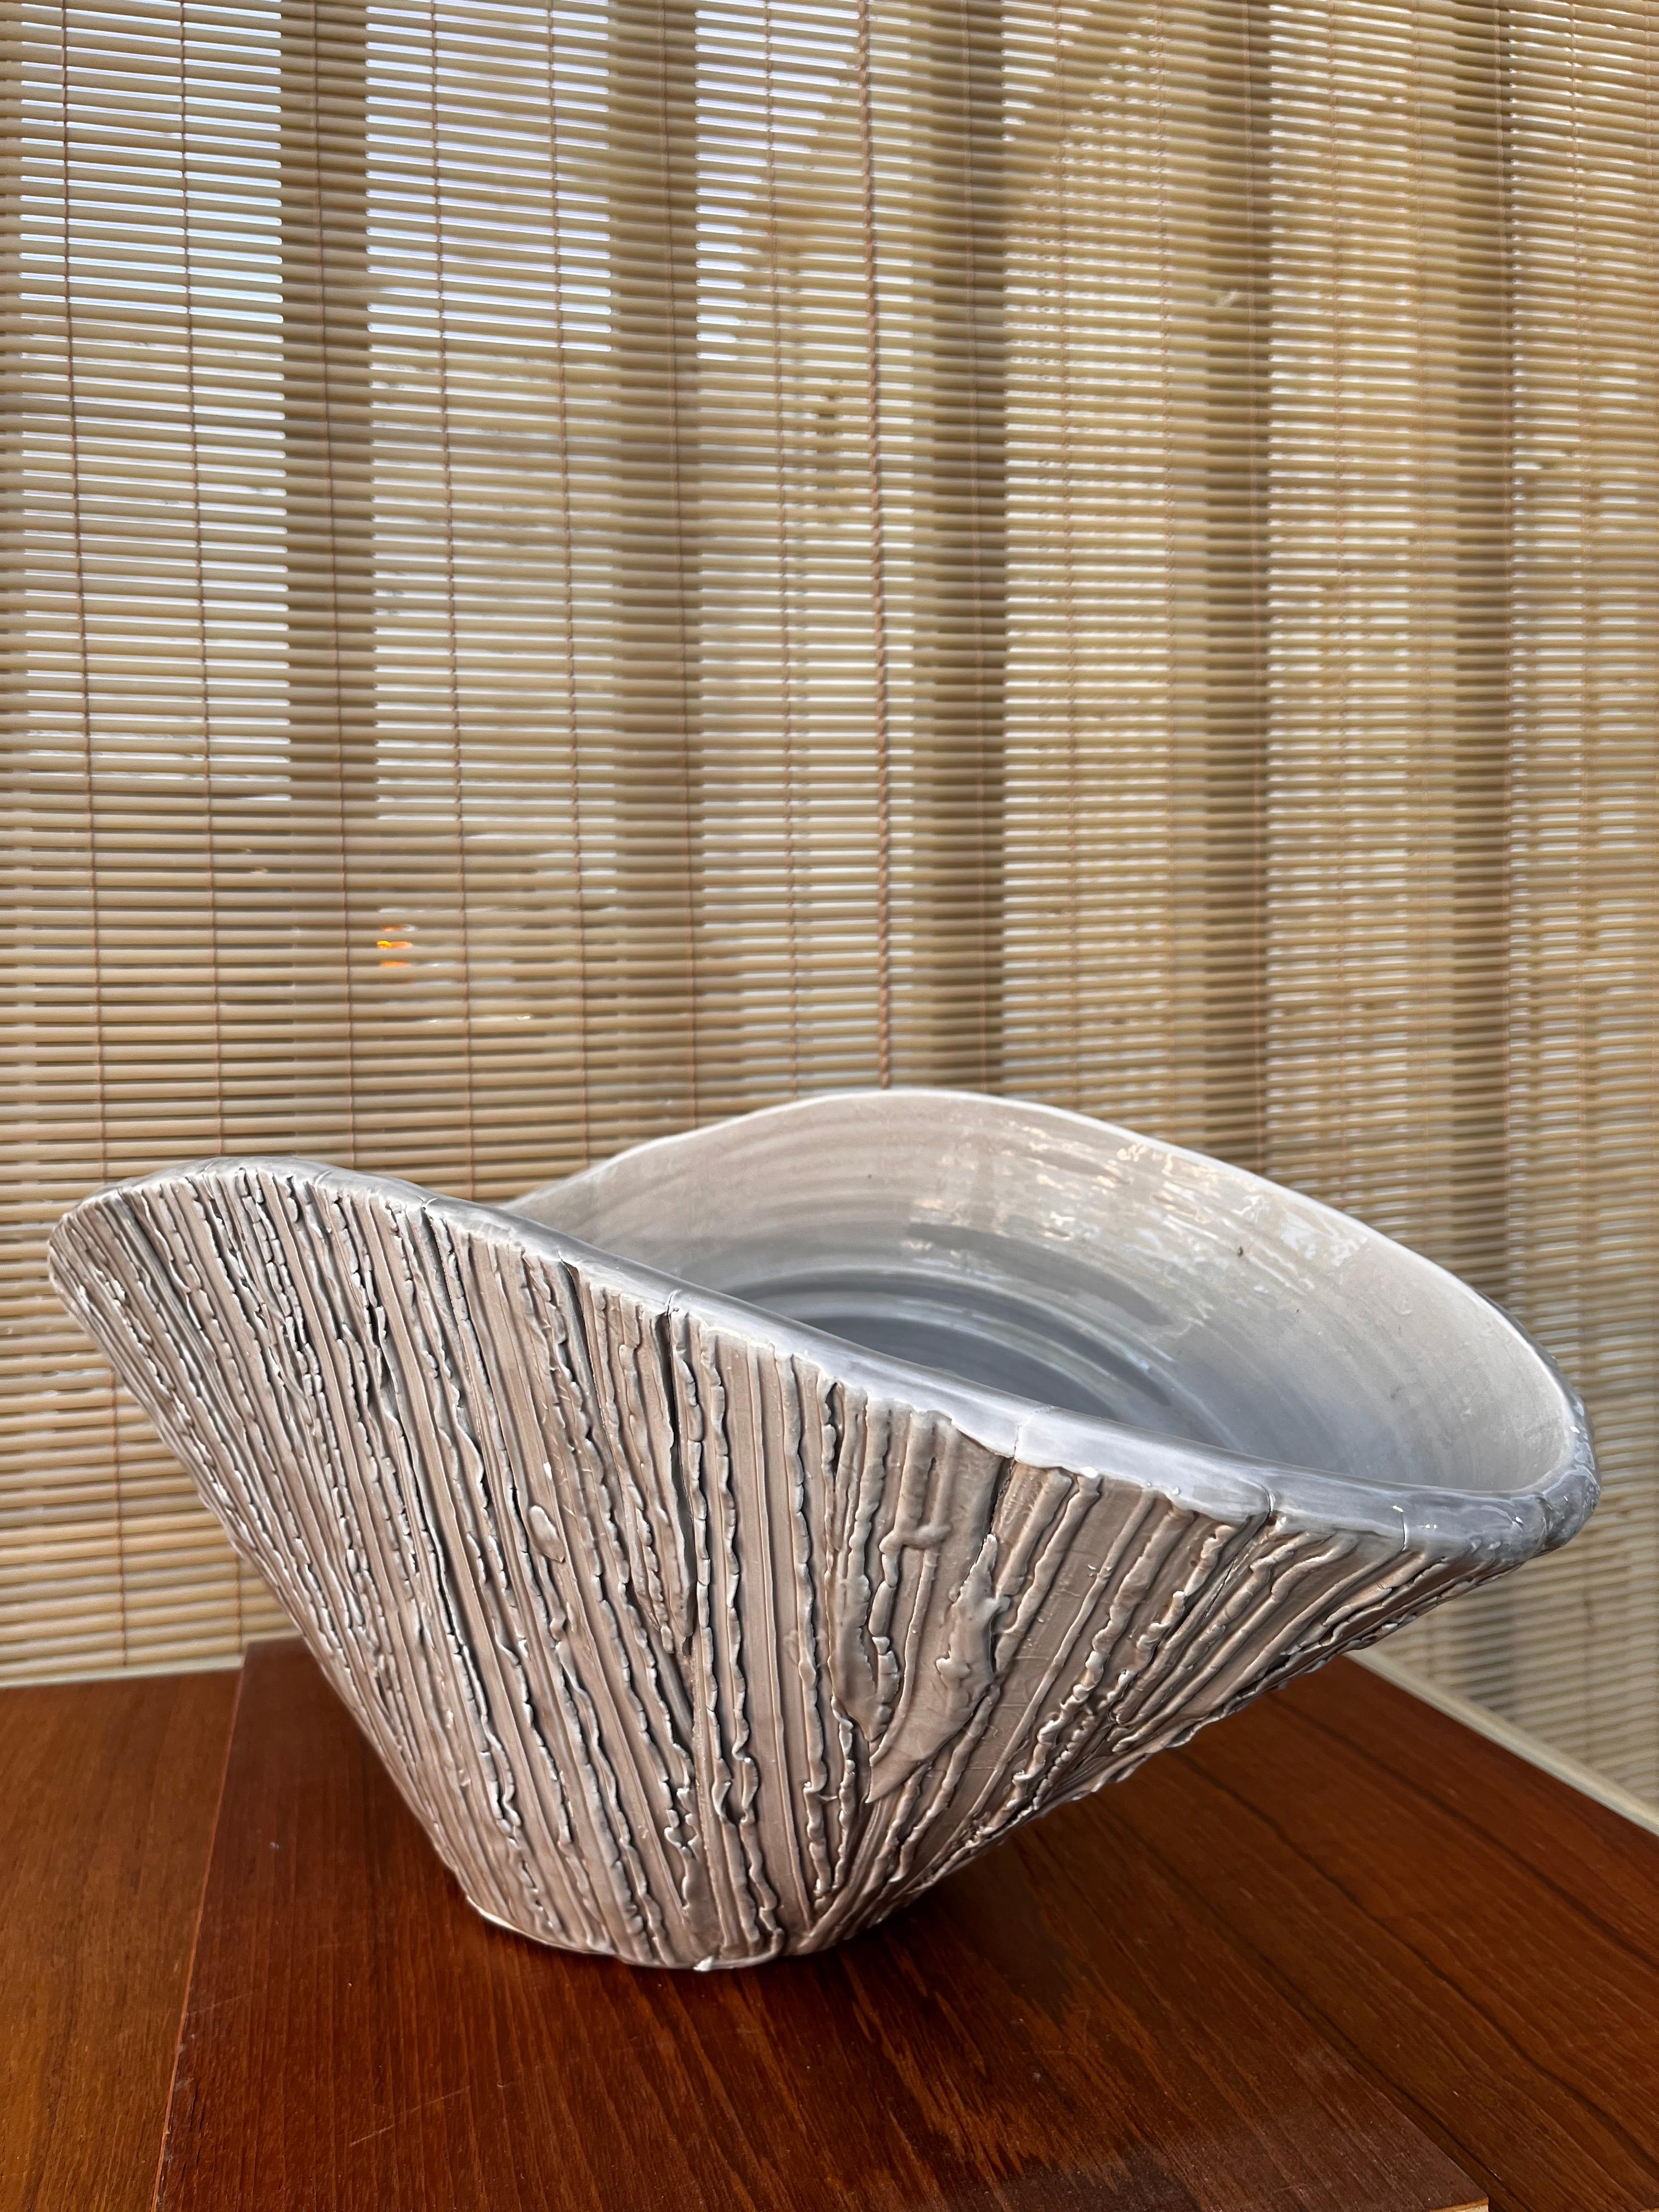 Large Early 21st Century Textured Ceramic Bowl / Centerpiece by Abigails, Italy In Good Condition For Sale In Miami, FL